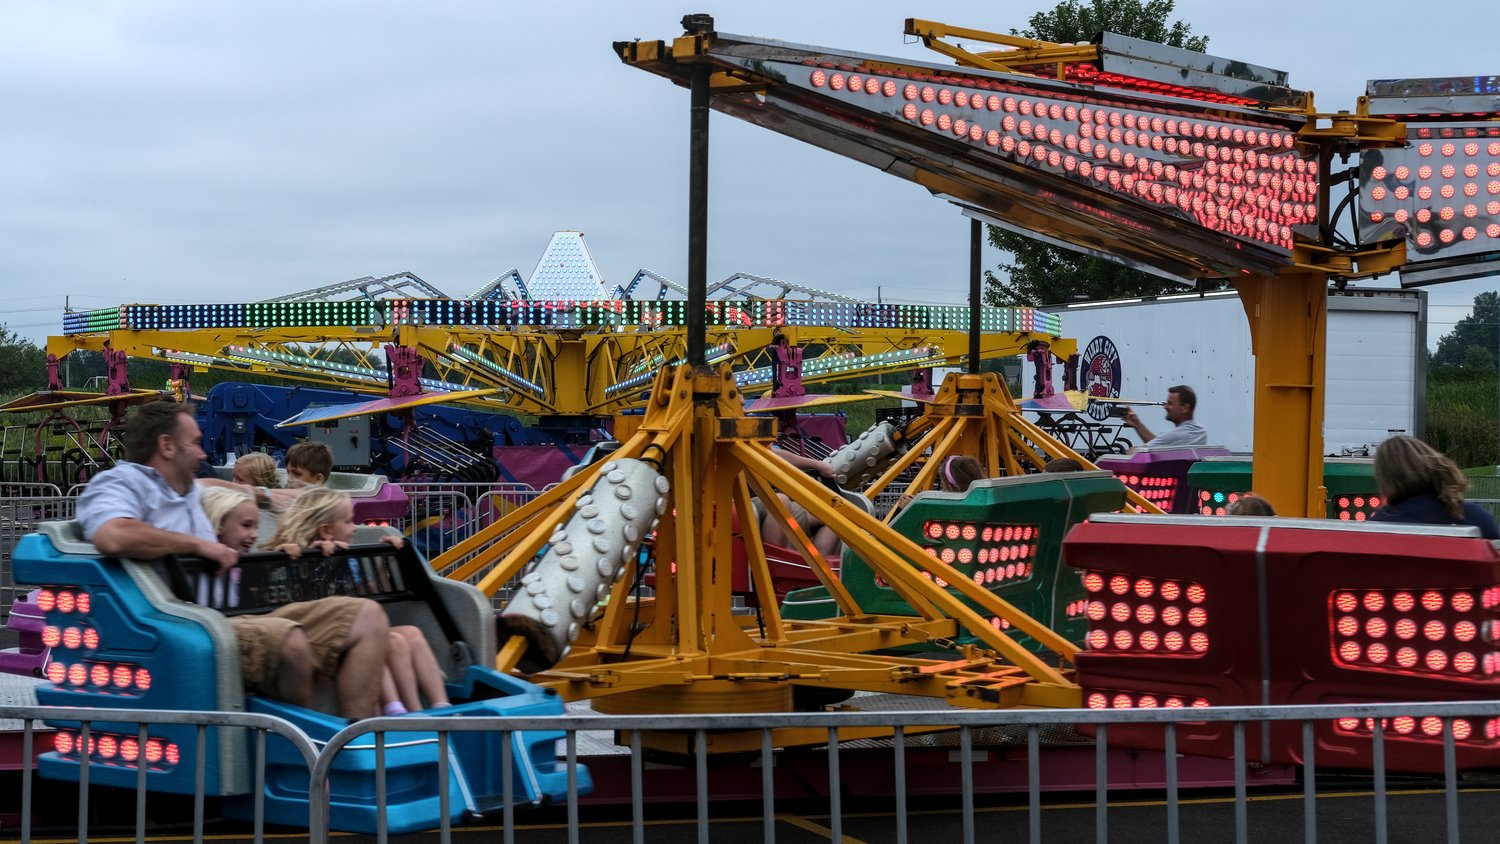 Riders on the Sizzler ride.